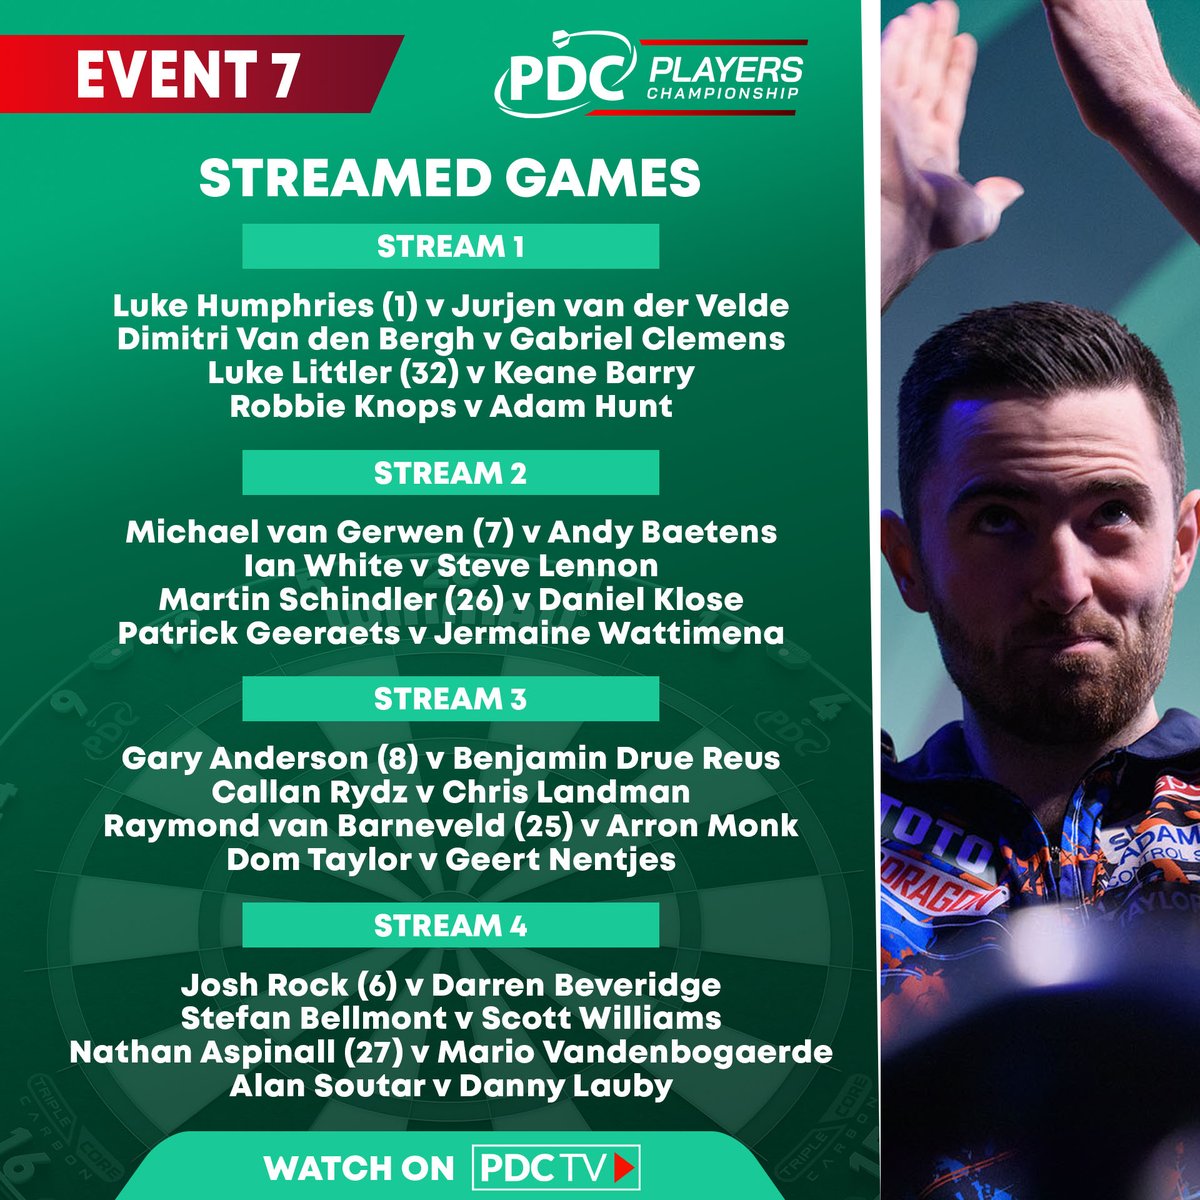 The PDC ProTour continues in Leicester today! Players Championship 7 gets underway from 1300 BST, and here are the first round games selected for live streaming on PDCTV! 🍿 📺 bit.ly/PDCTVLive #PC7